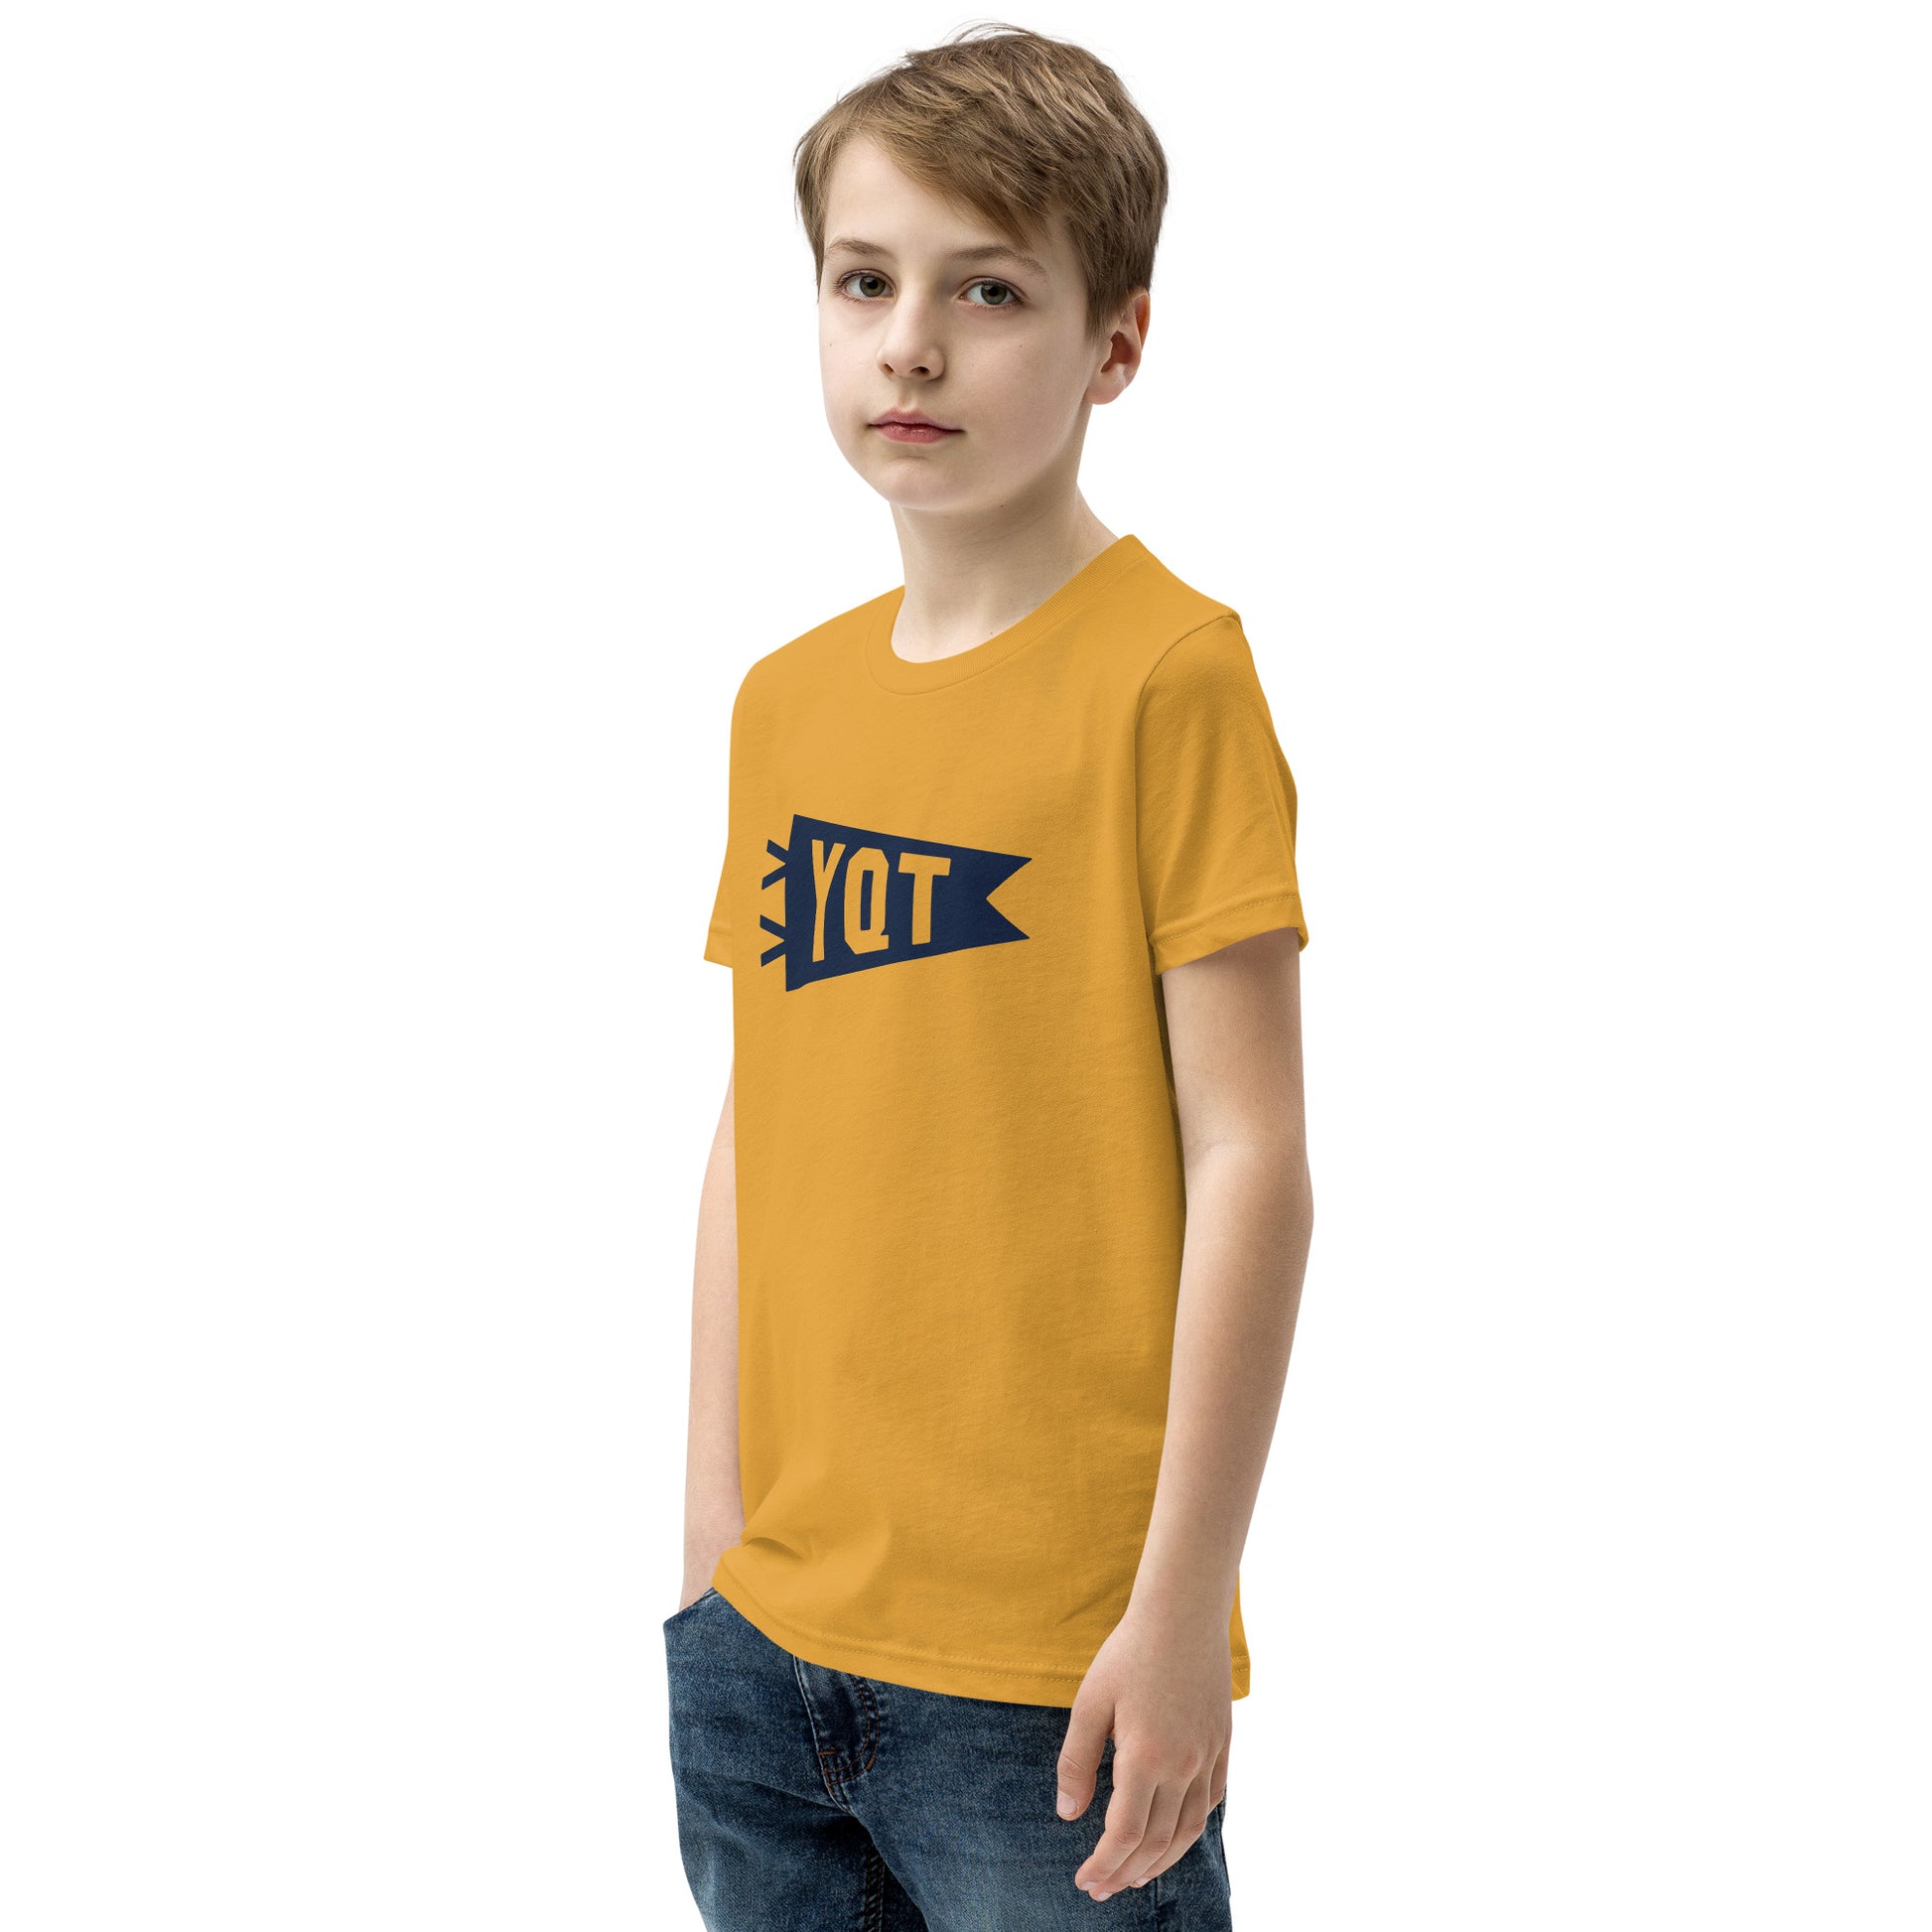 Kid's Airport Code Tee - Navy Blue Graphic • YQT Thunder Bay • YHM Designs - Image 06